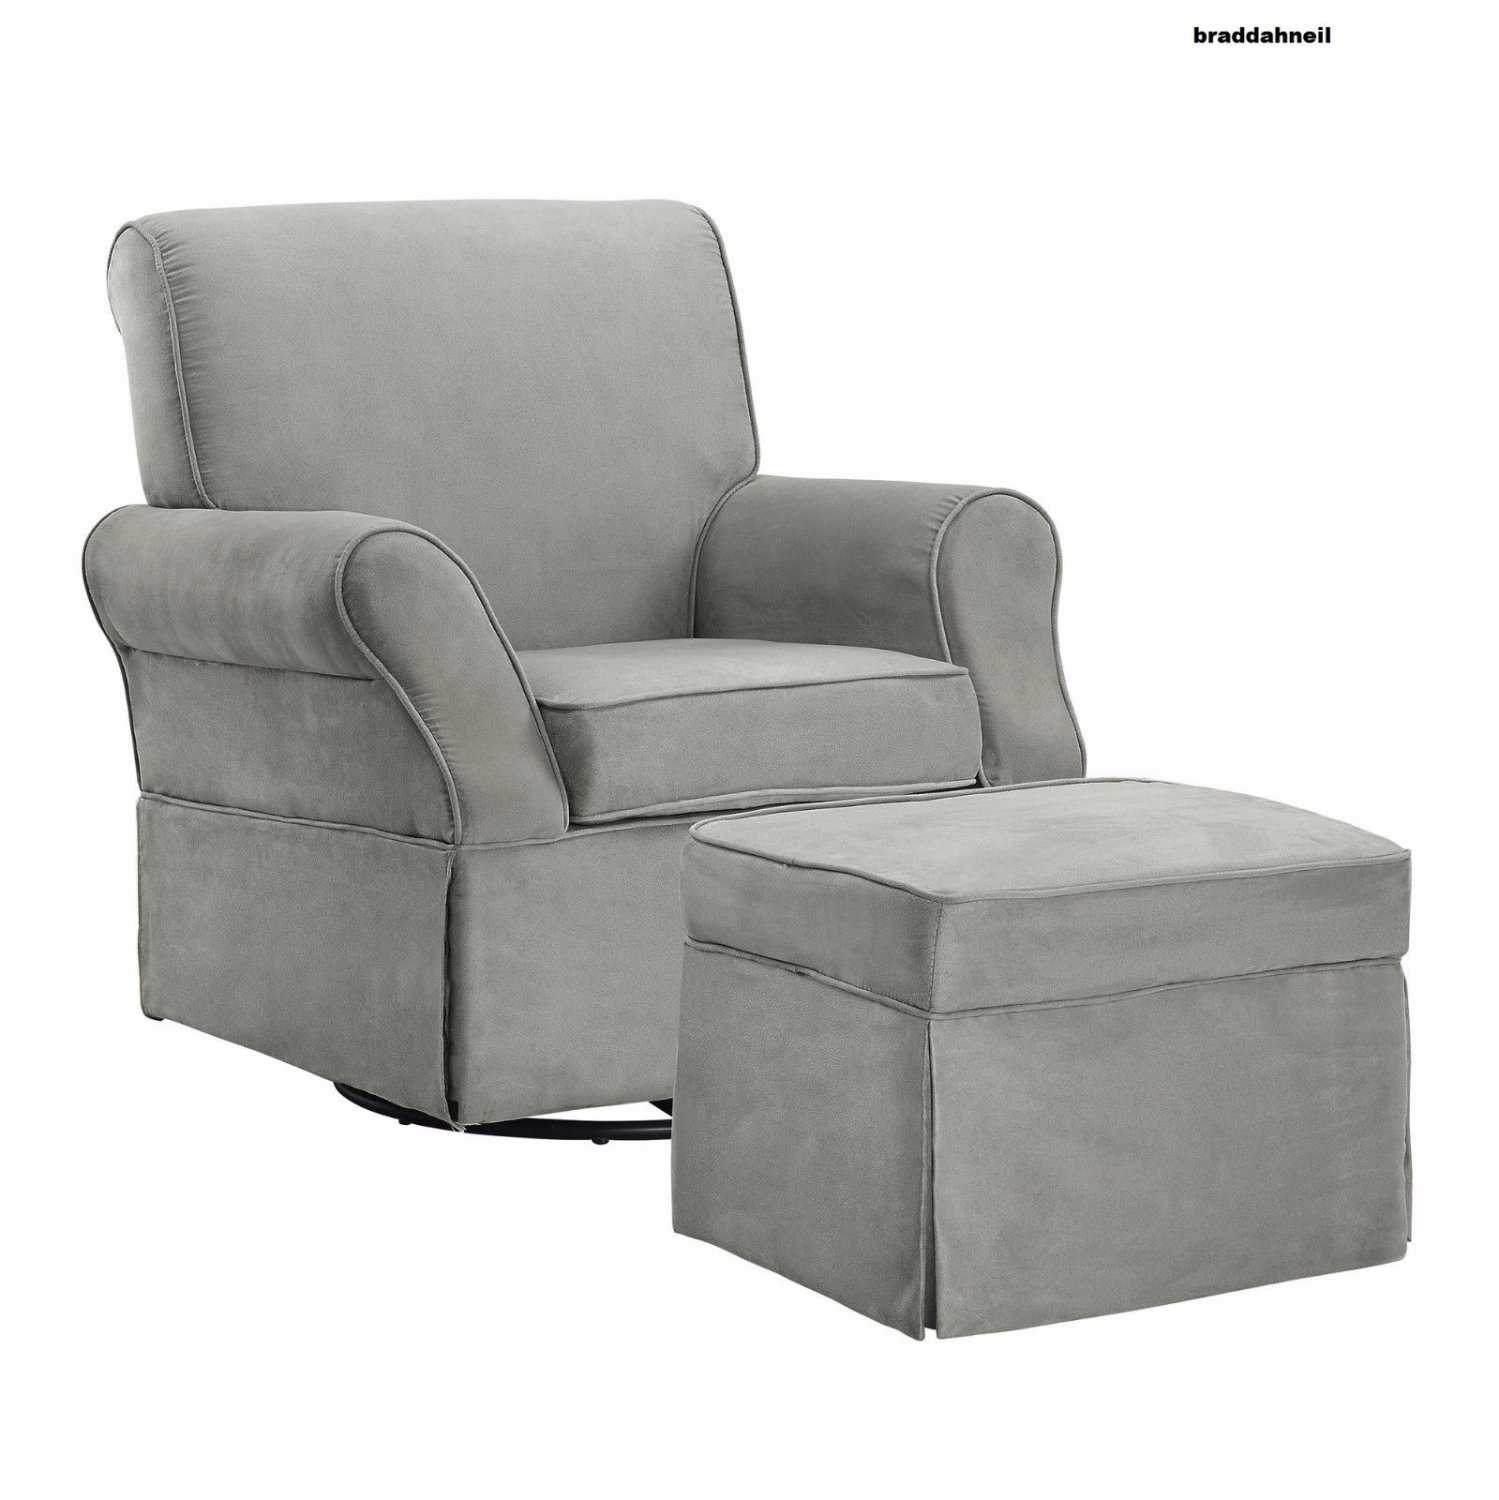 Glider Swivel Upholstered Chair Ottoman Infant Nursery Furniture Baby